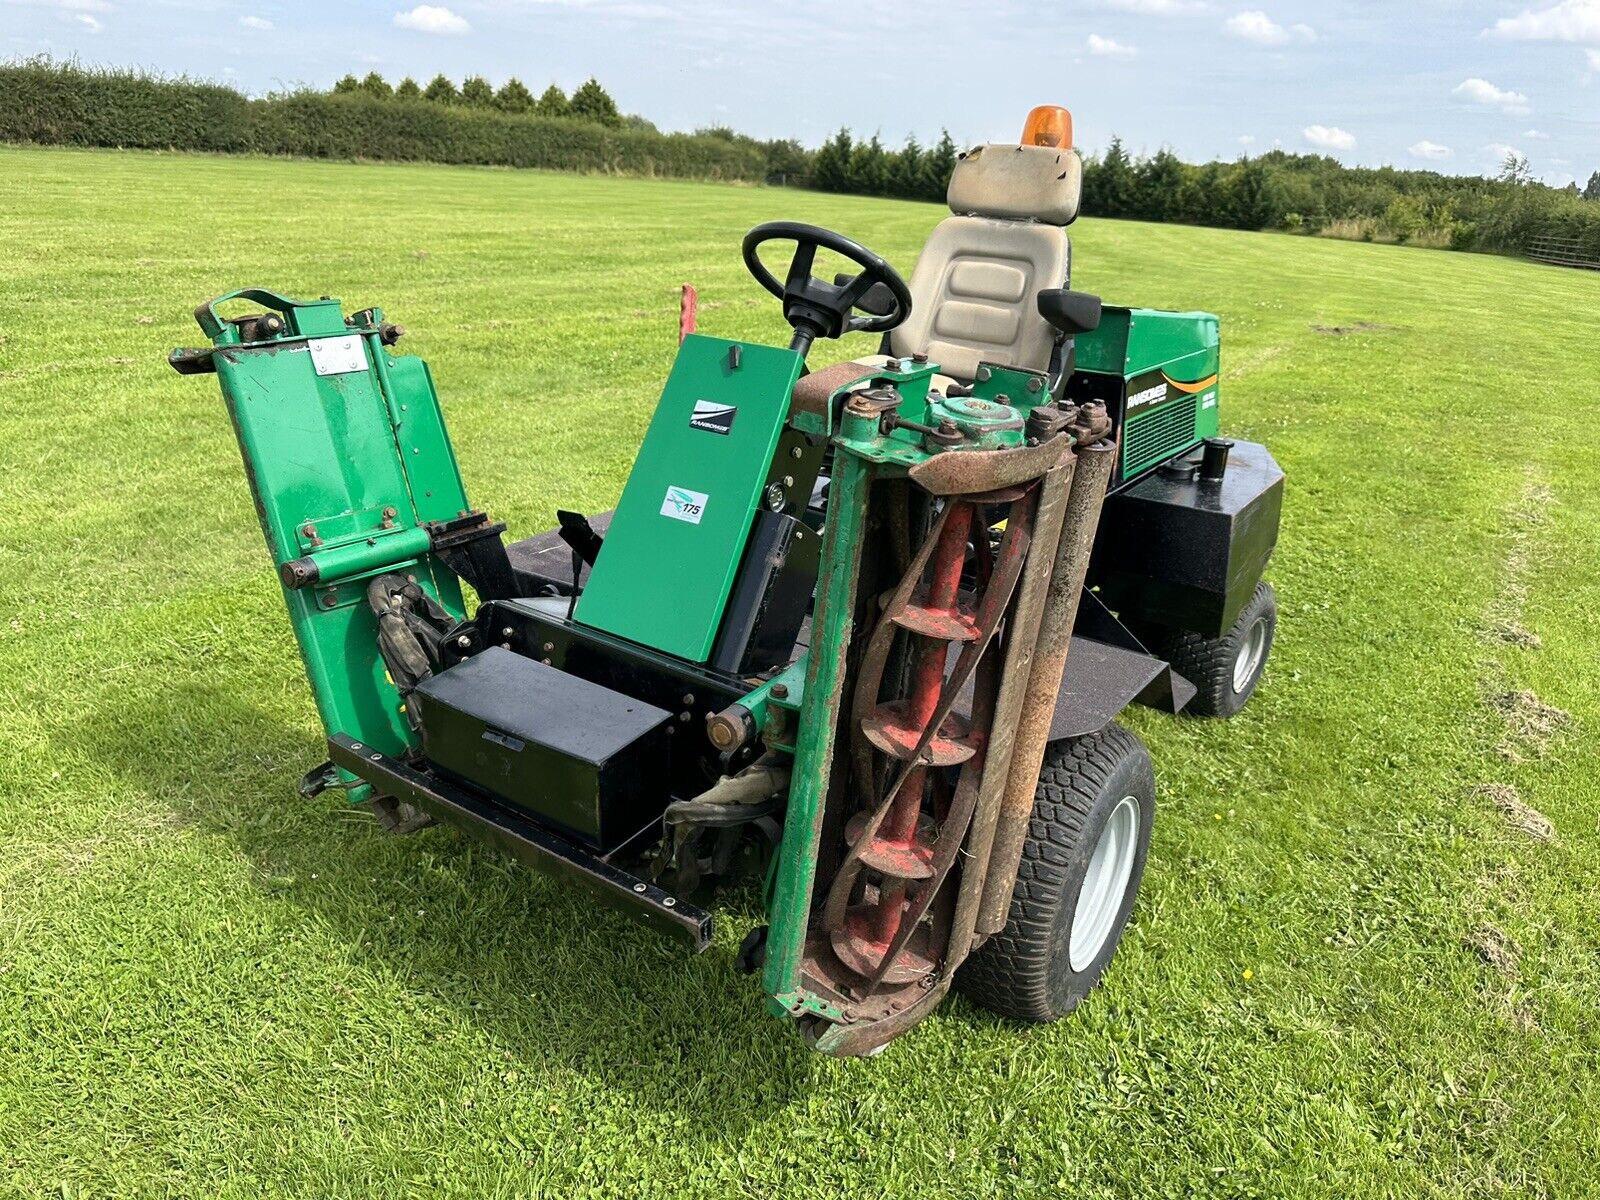 RANSOMES HIGHWAY 2130 TRIPLE CYLINDER RIDE SIT ON LAWN MOWER PARKWAY 2